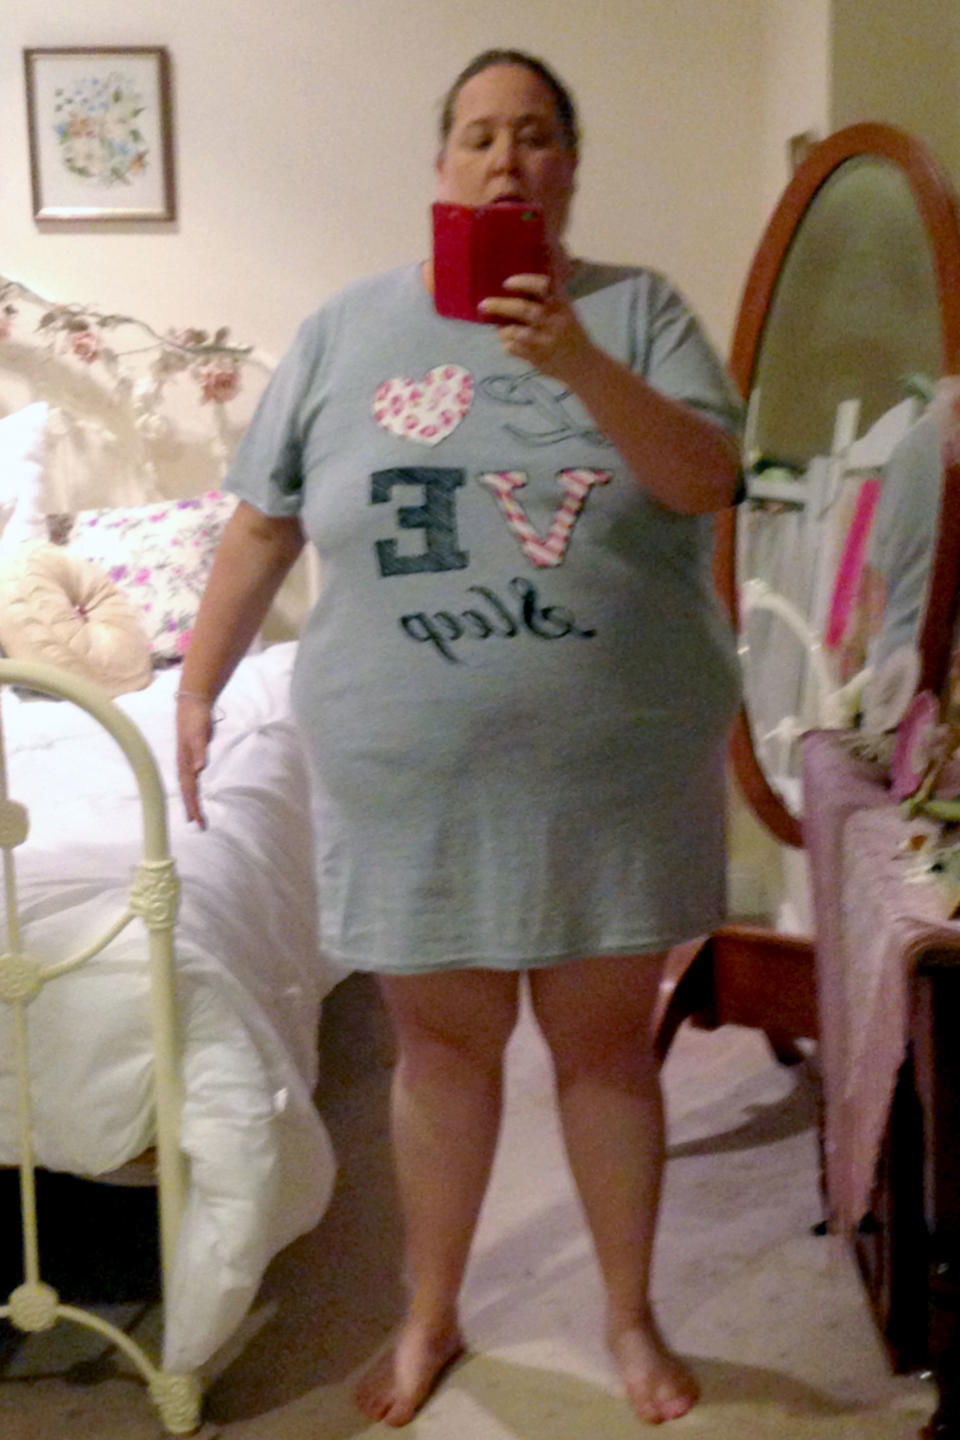 Turner was 25 stone and four pounds at her heaviest weight. [Photo: Caters News]